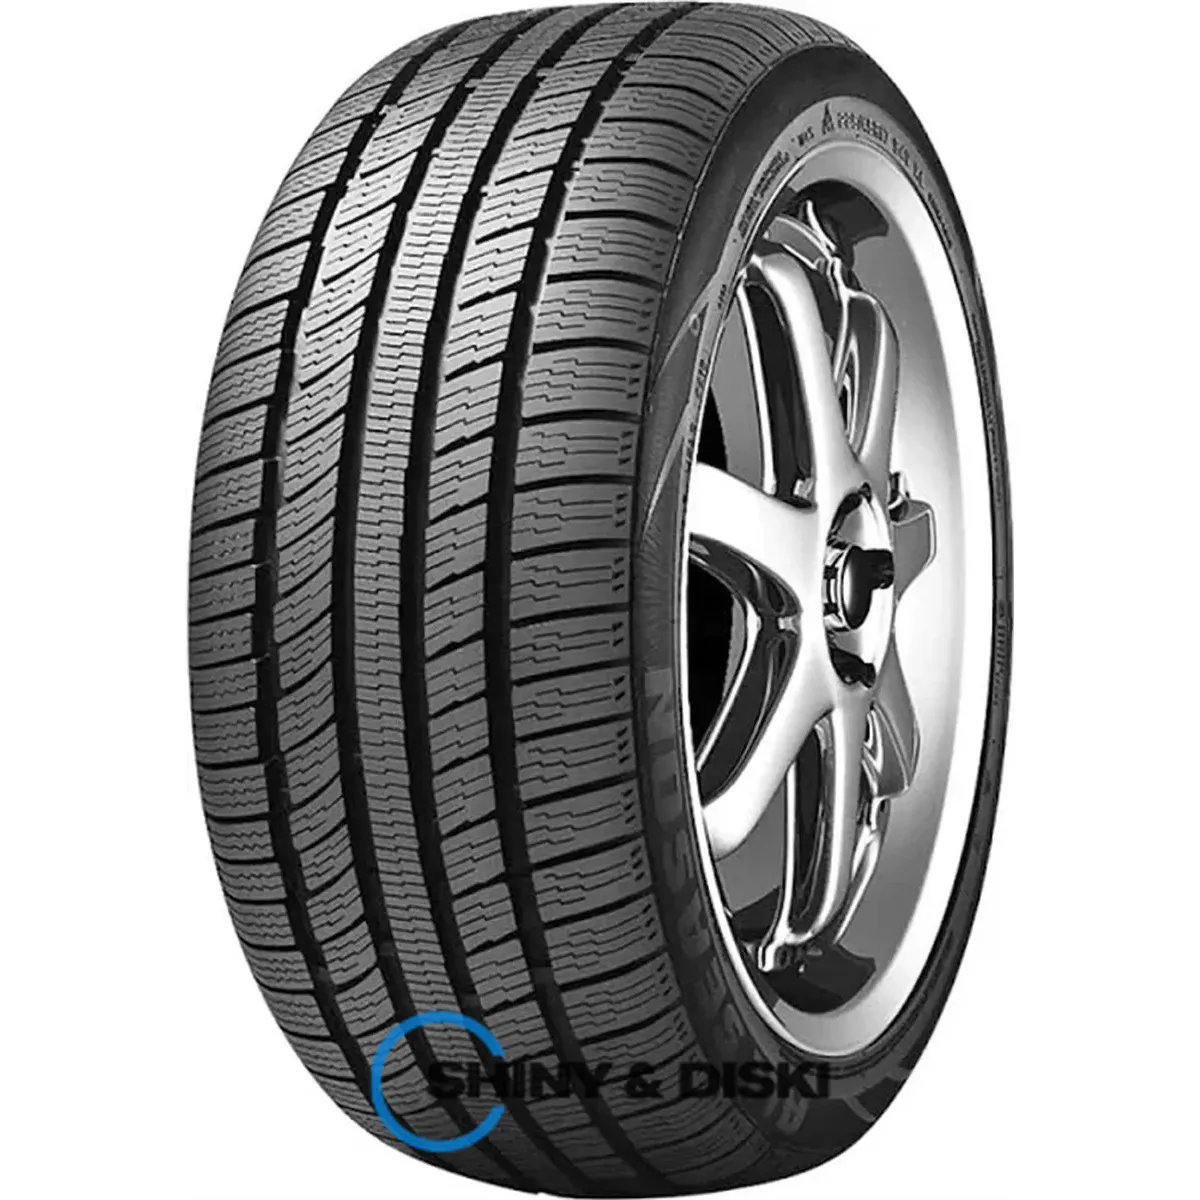 mirage mr-762 as 175/65 r14 82t